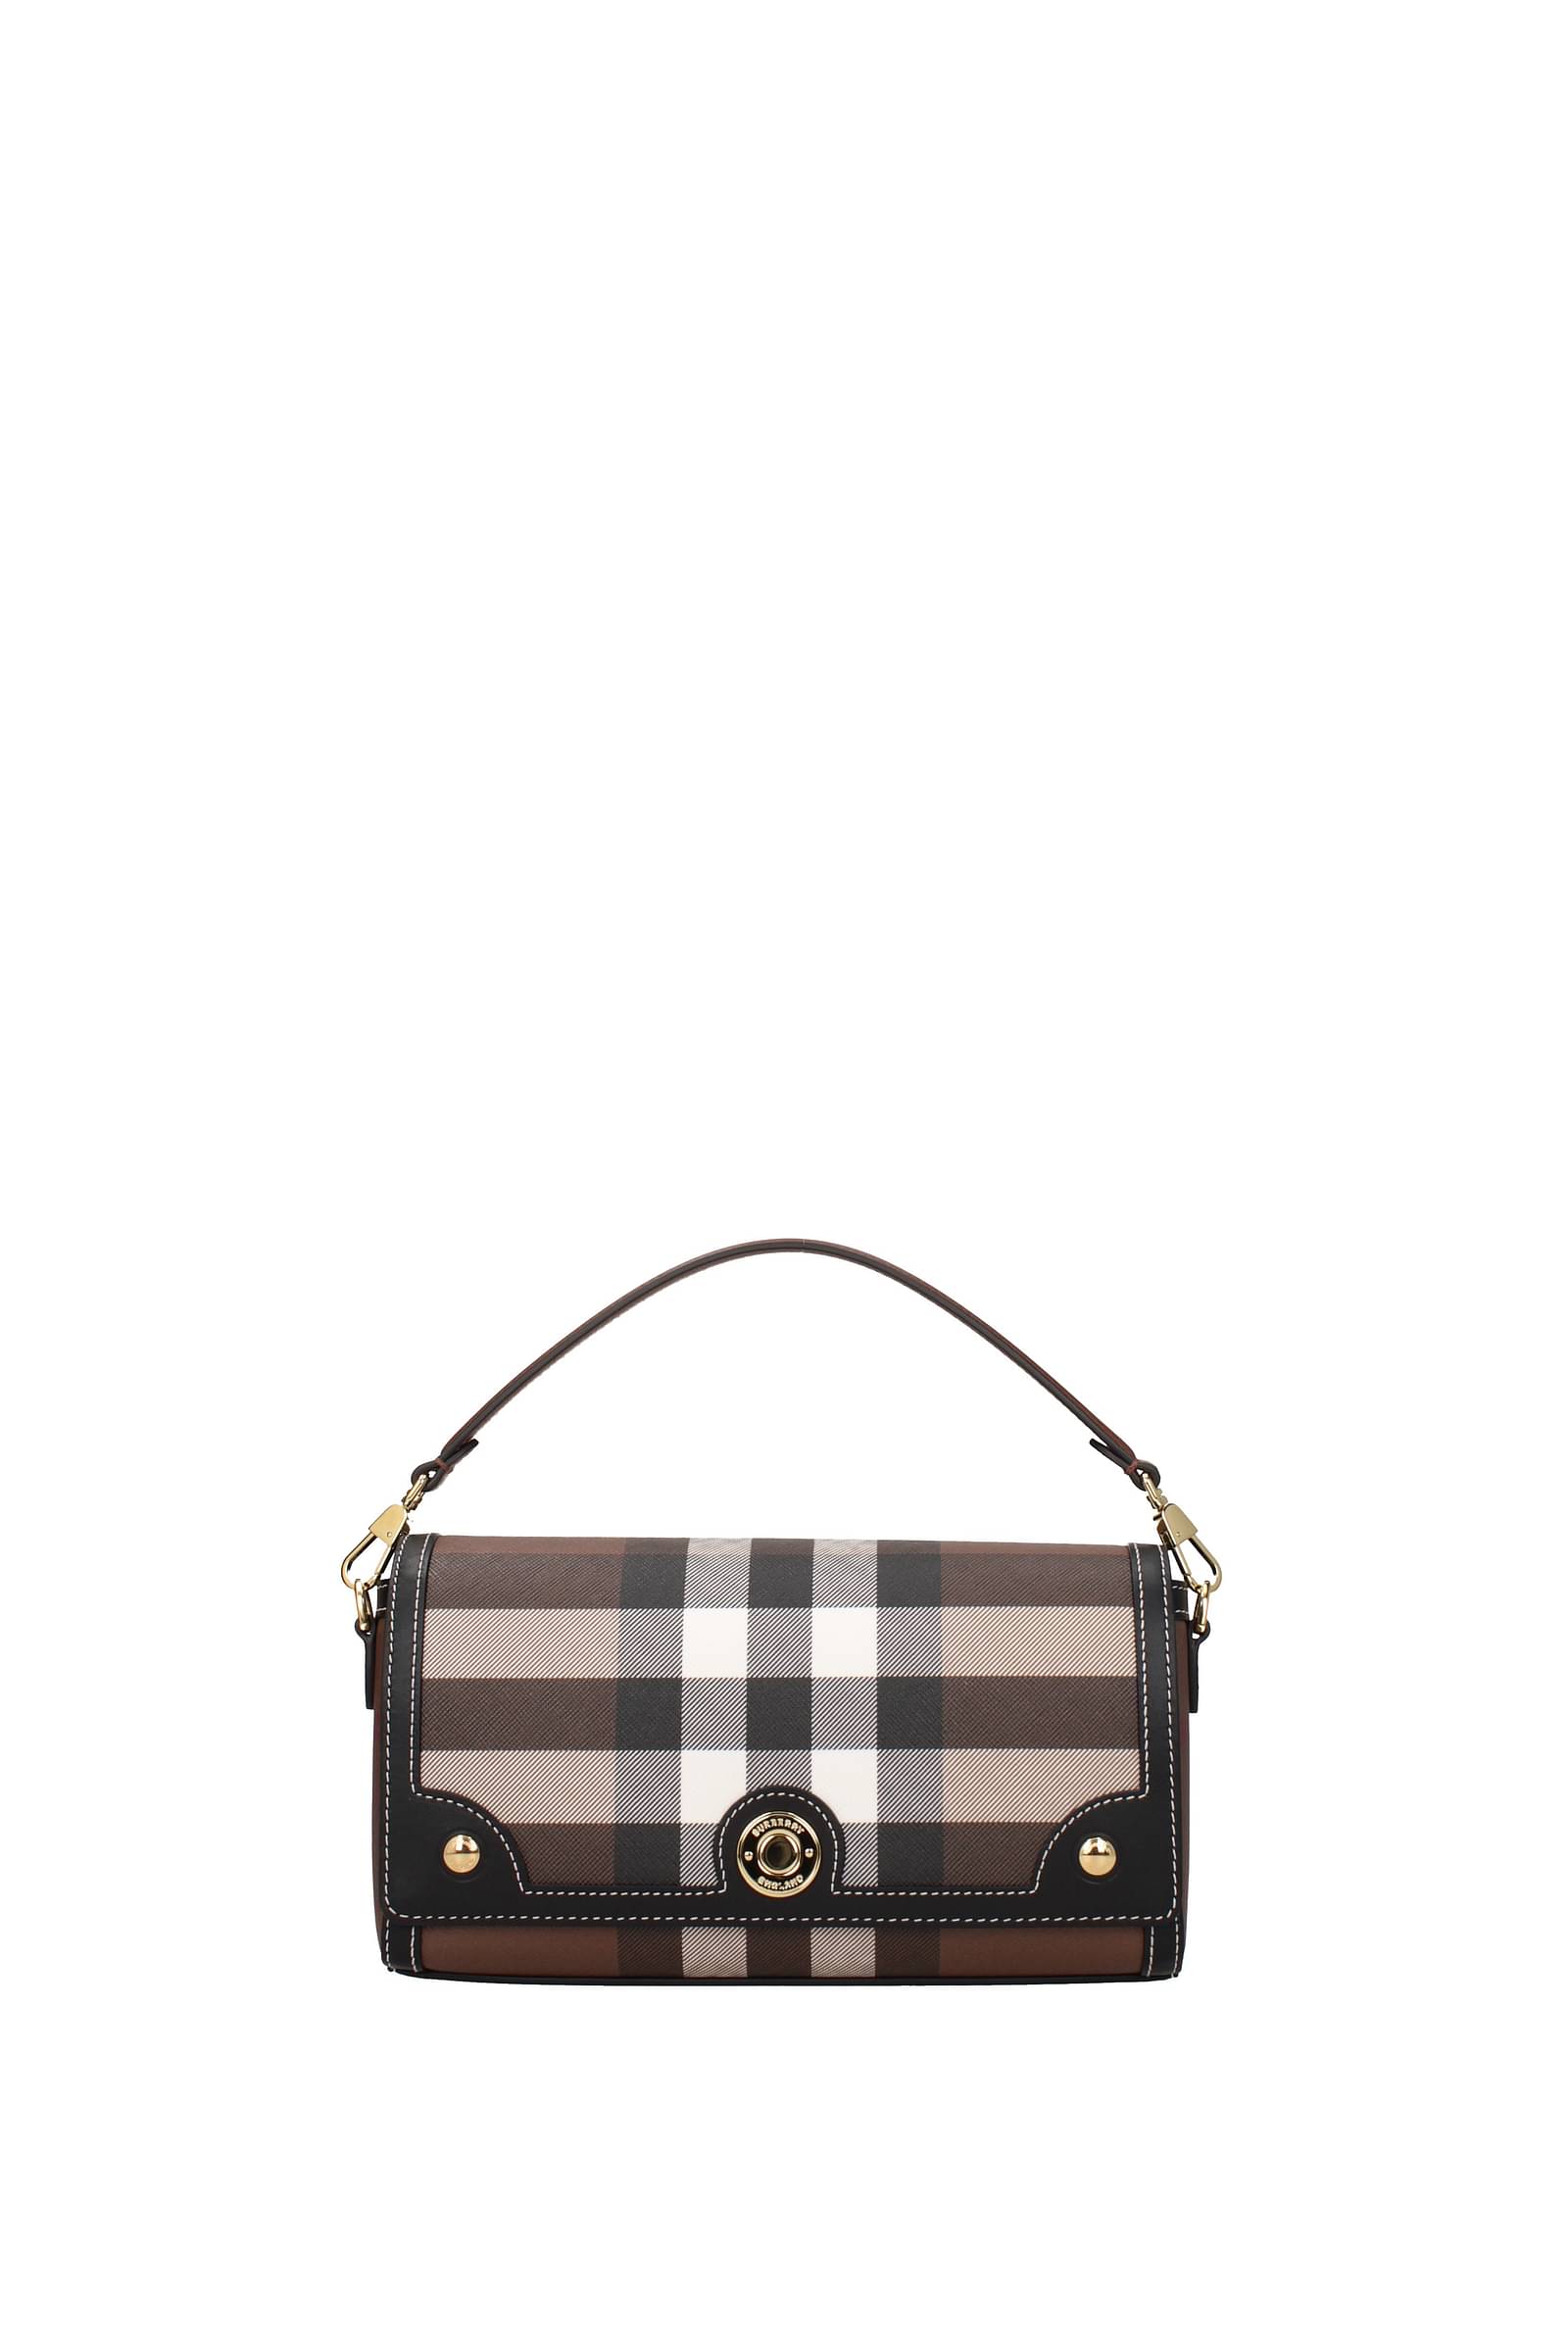 Shop Burberry Bags for Women | Crossbody, Tote & Handbags | Buy Now Pay  Later. – LINVELLES